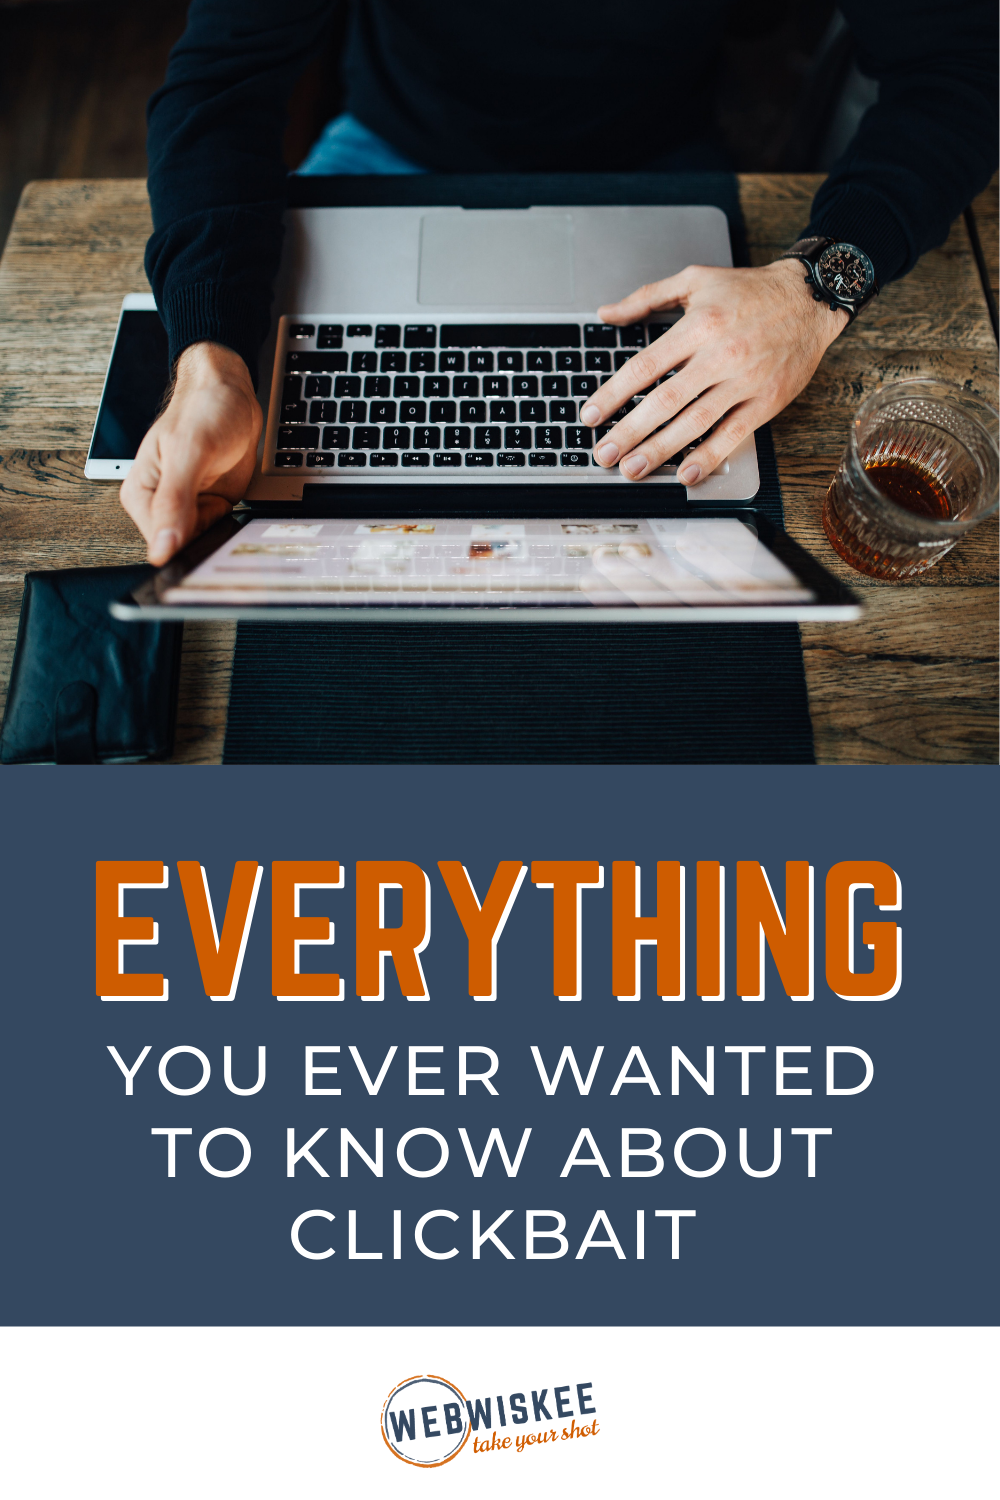 Everything You Ever Wanted to Know About Clickbait by WebWiskee